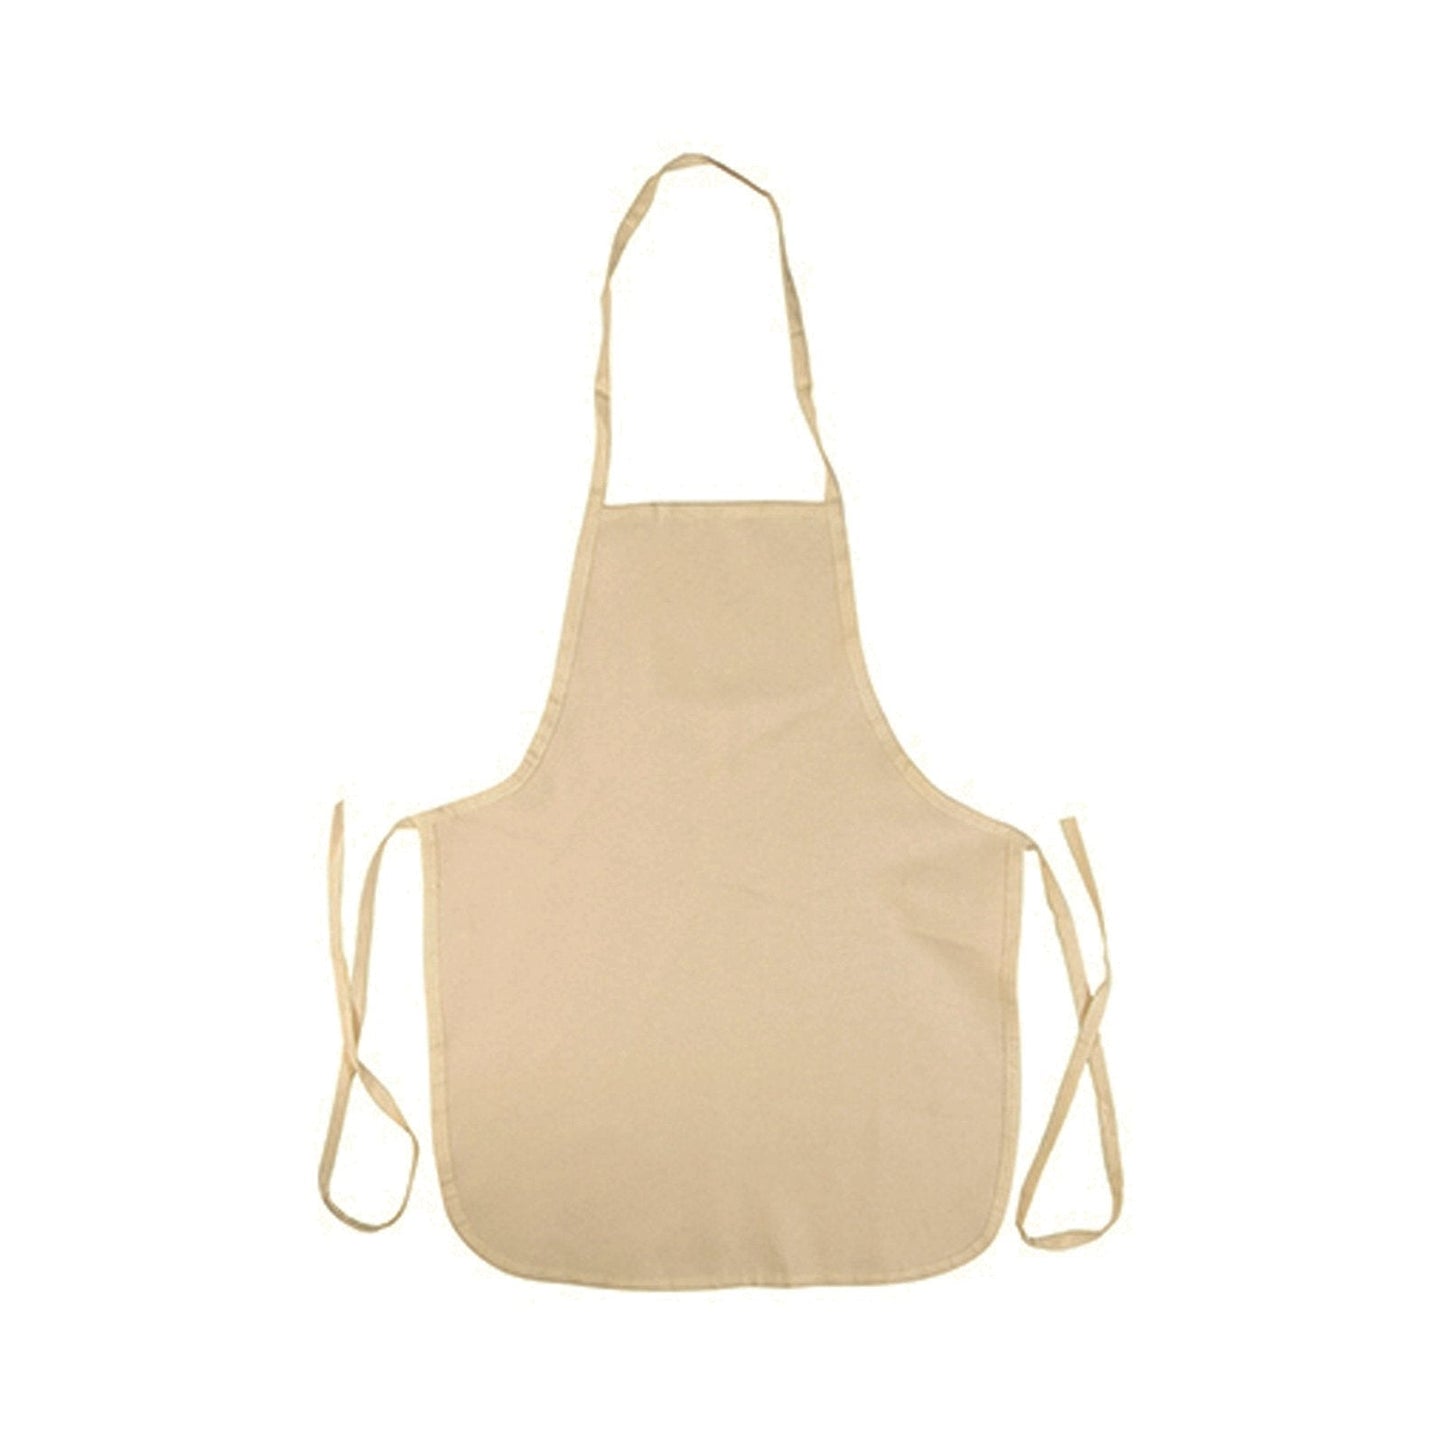 Personalised Canvas Apron with Heaven Love Message